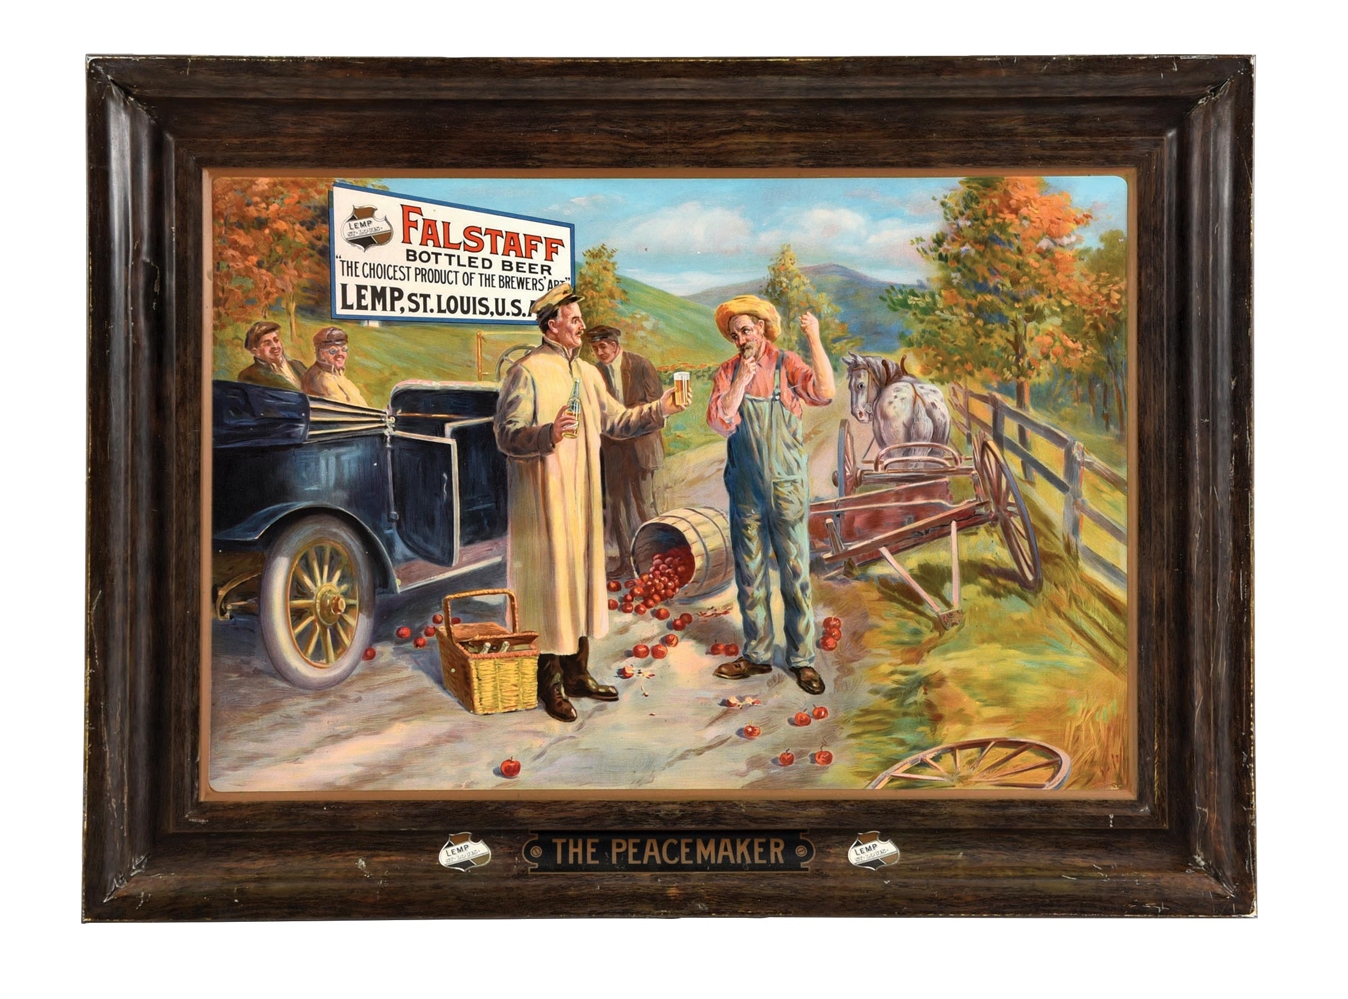 FALSTAFF BOTTLED BEER SELF-FRAMED TIN LITHOGRAPH W/ AUTOMOTIVE GRAPHIC